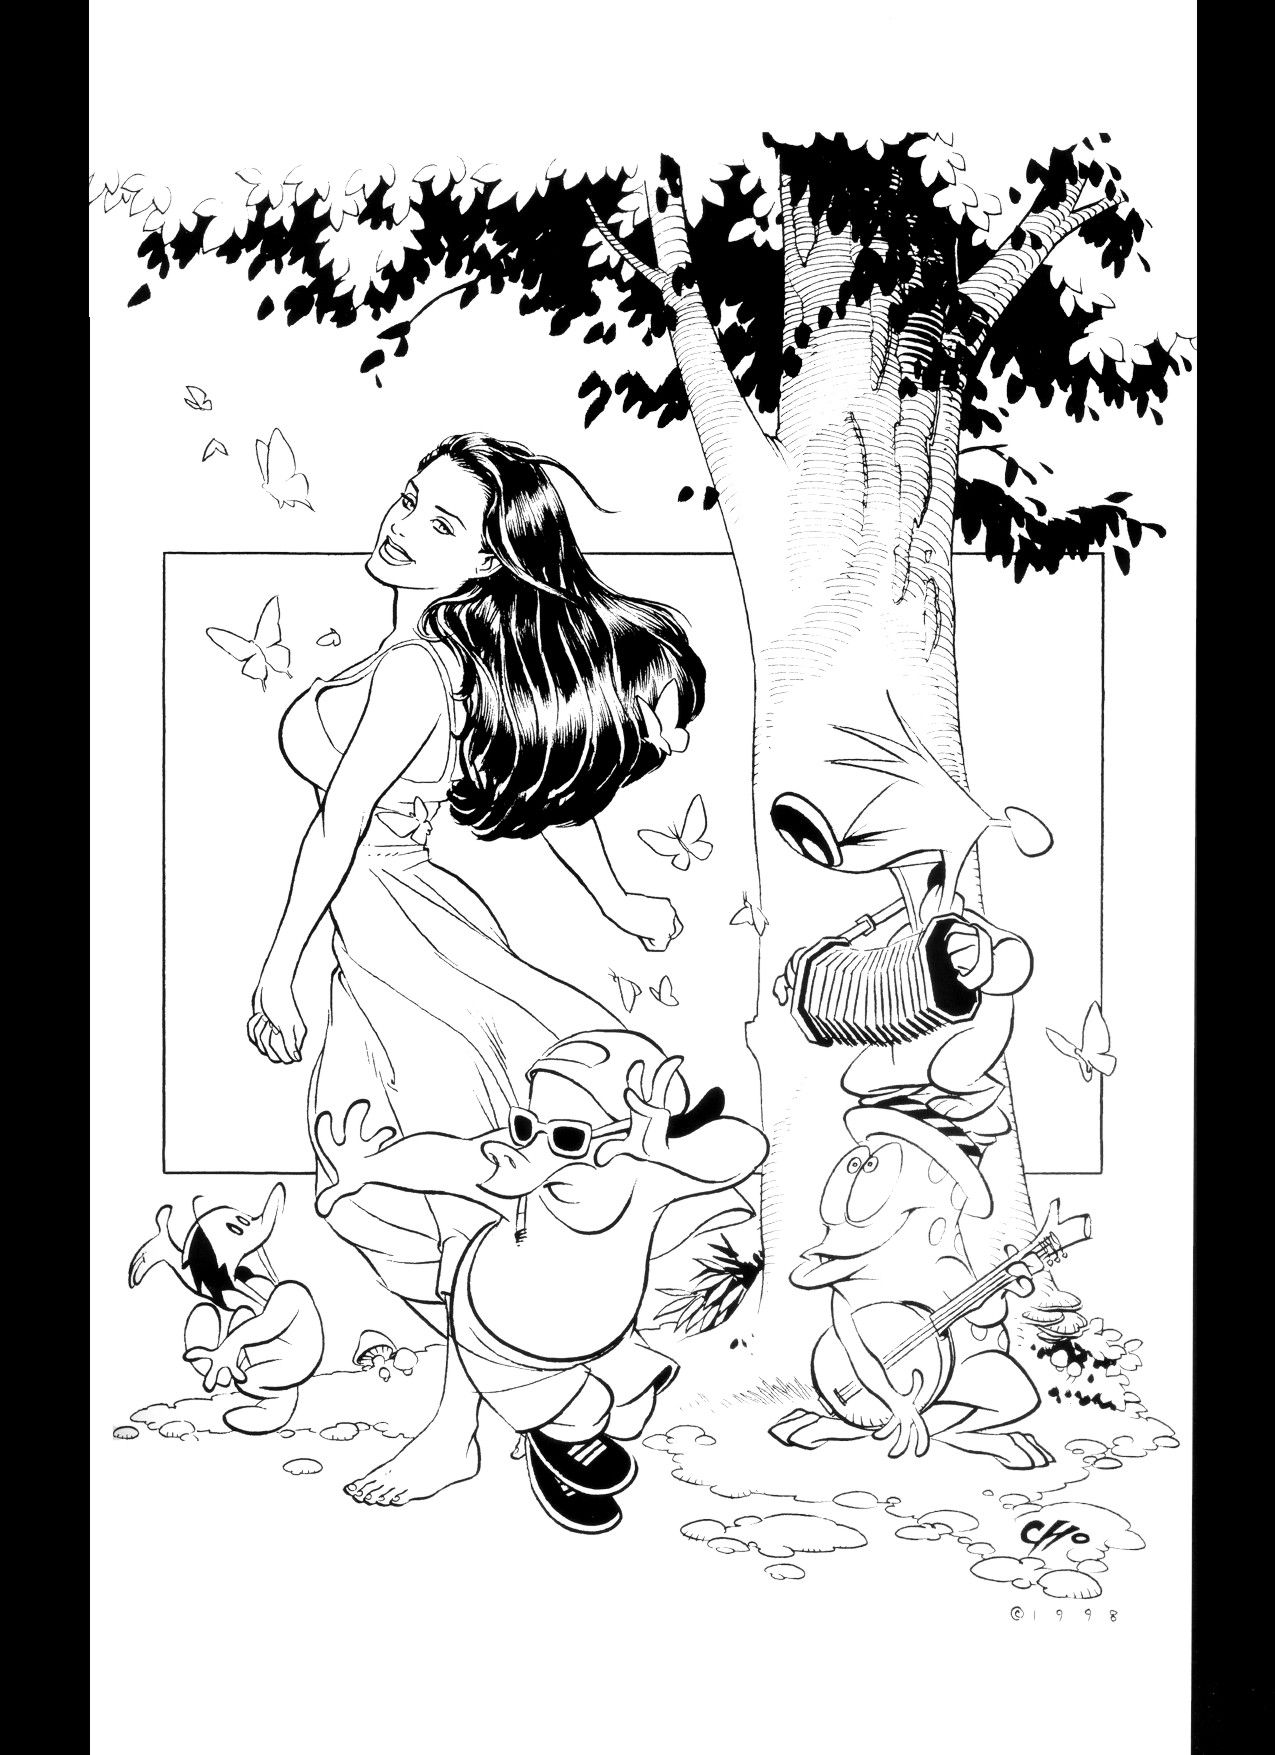 [Frank Cho] Women - Selected Drawings and Illustrations 76